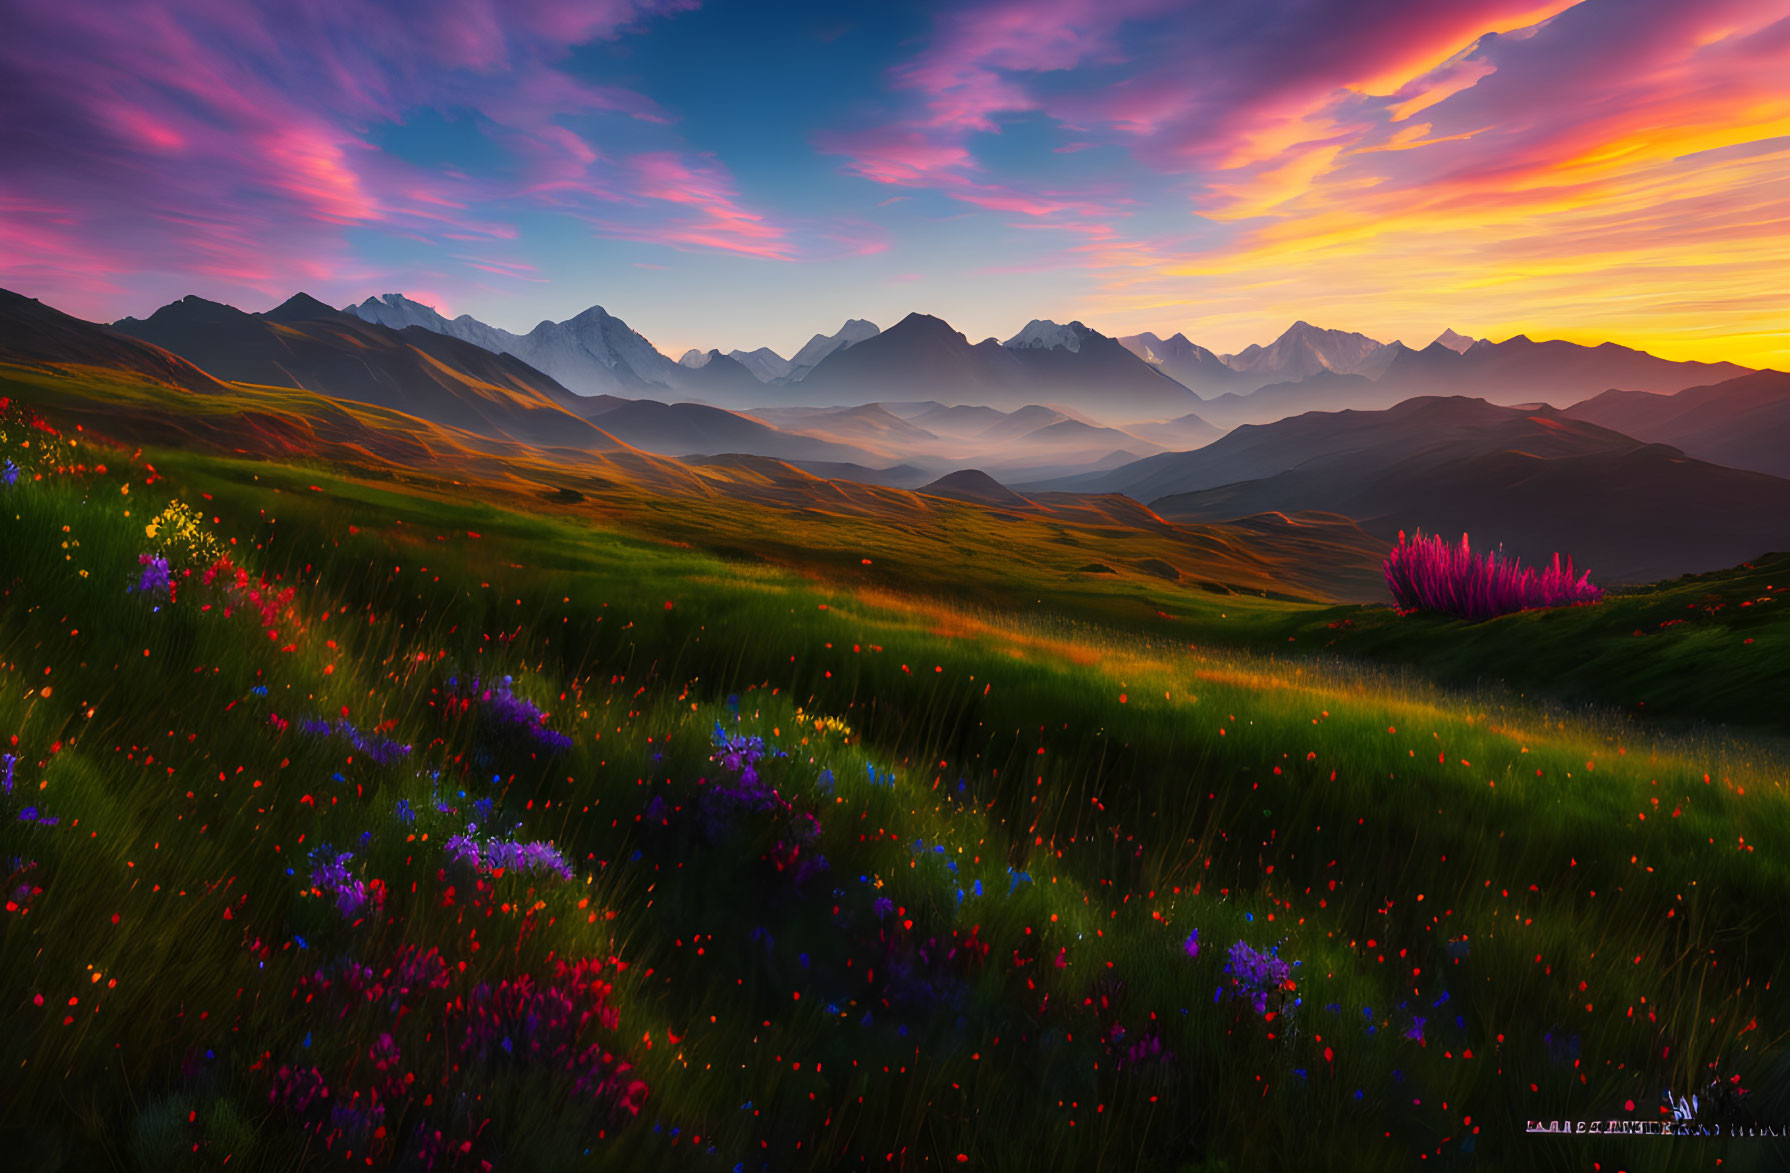 Colorful Wildflowers and Sunset over Mountain Range